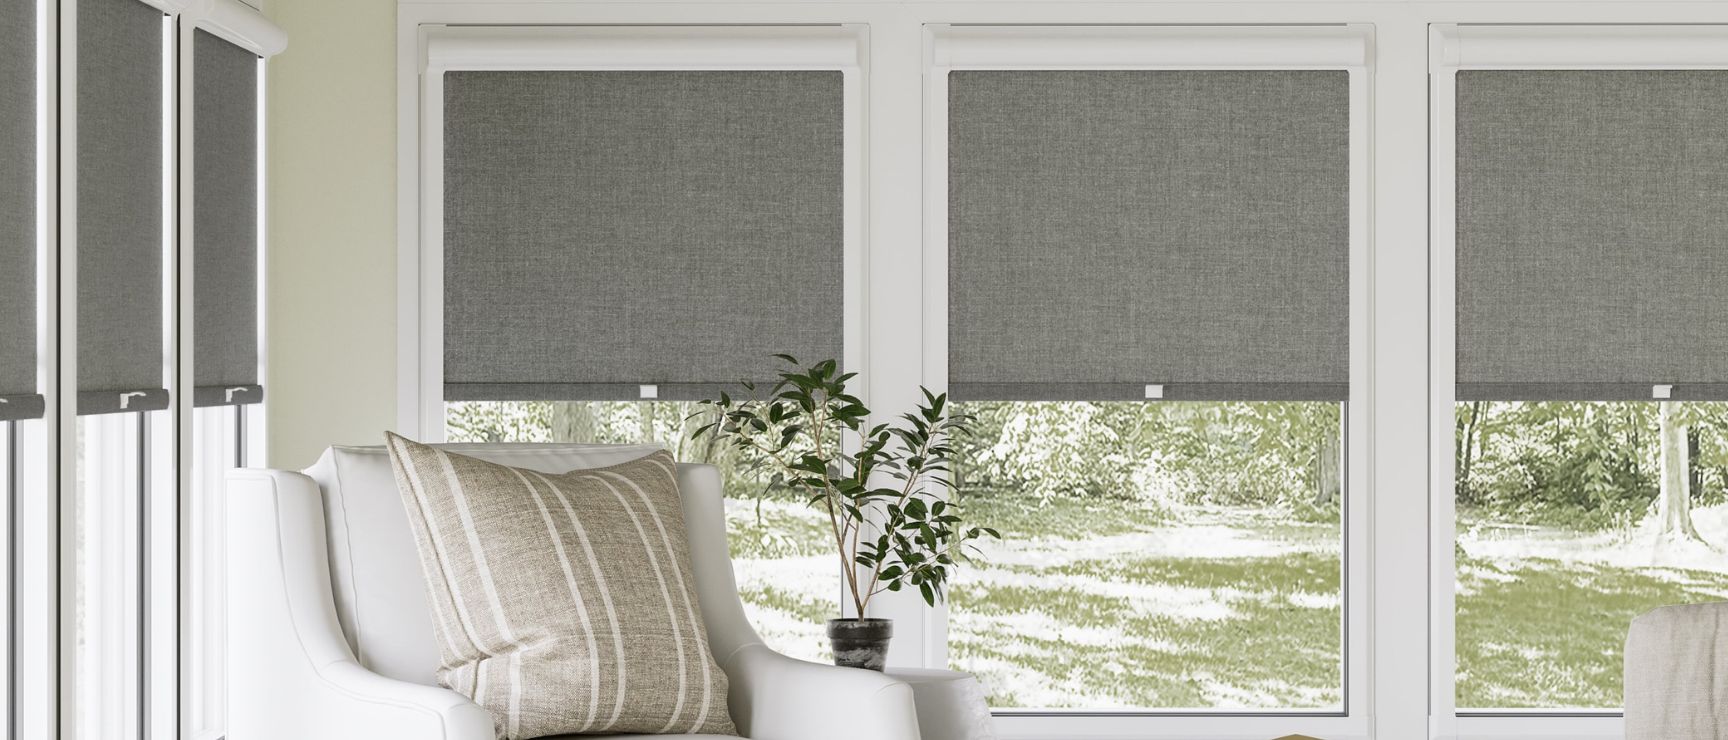 How to re-tension a Perfect Fit Roller blind?